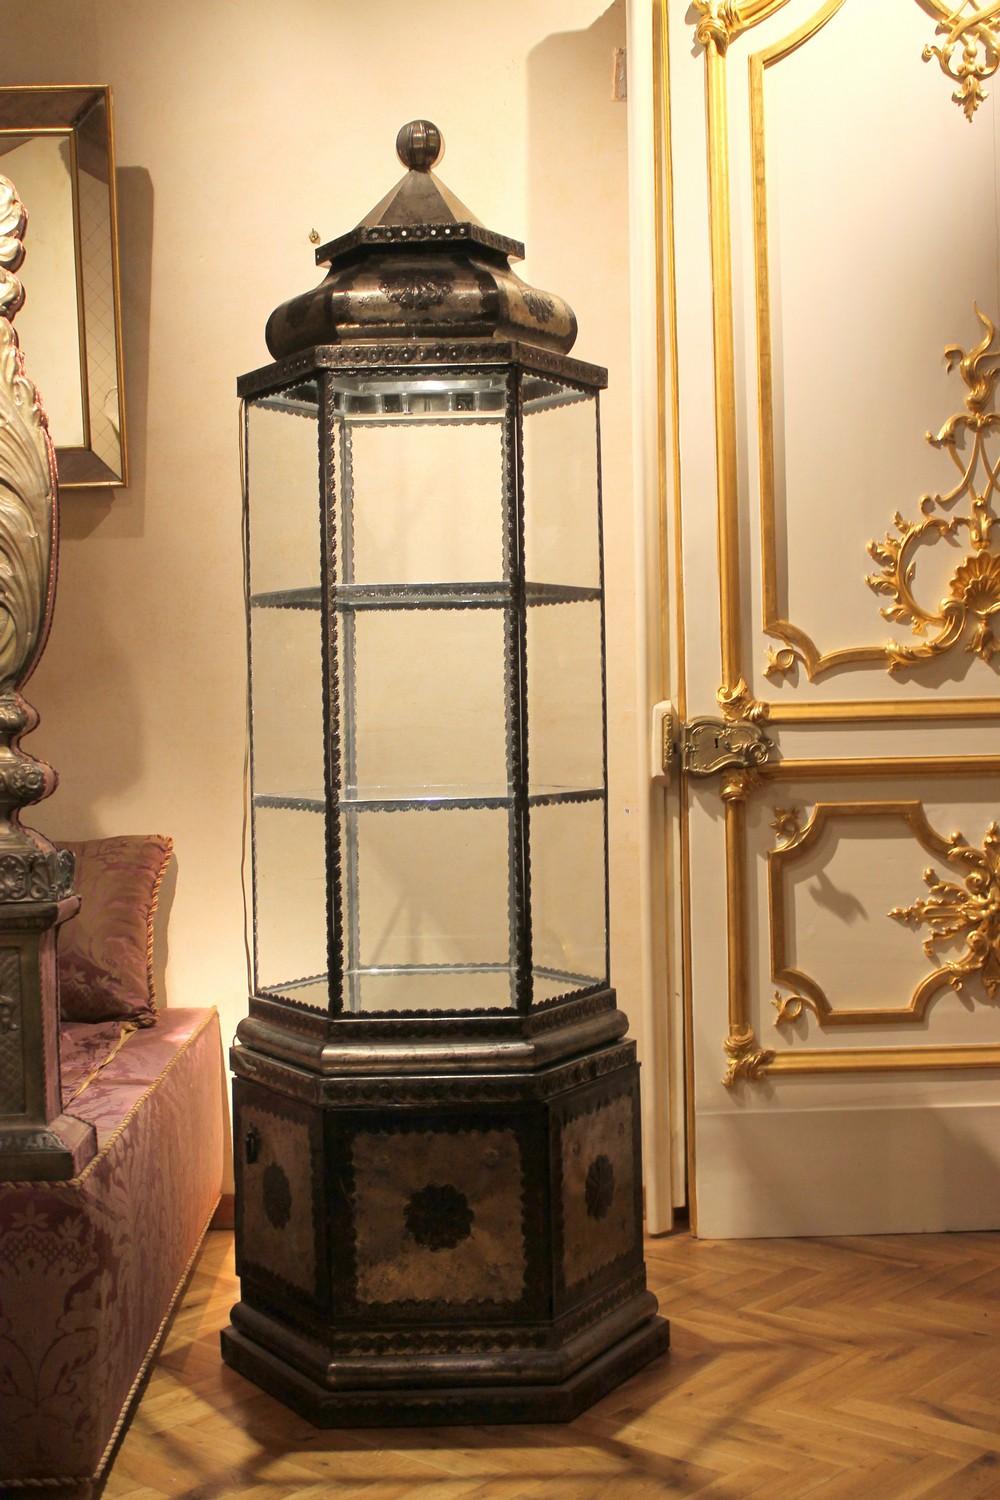 Unique of its kind, this tall hexagonal display case recalls a Middle Eastern artisan and artistic workmanship both in its Islamic style architectural shape and metal embossed decorations. This whimsical vitrine cabinet could be dated between the